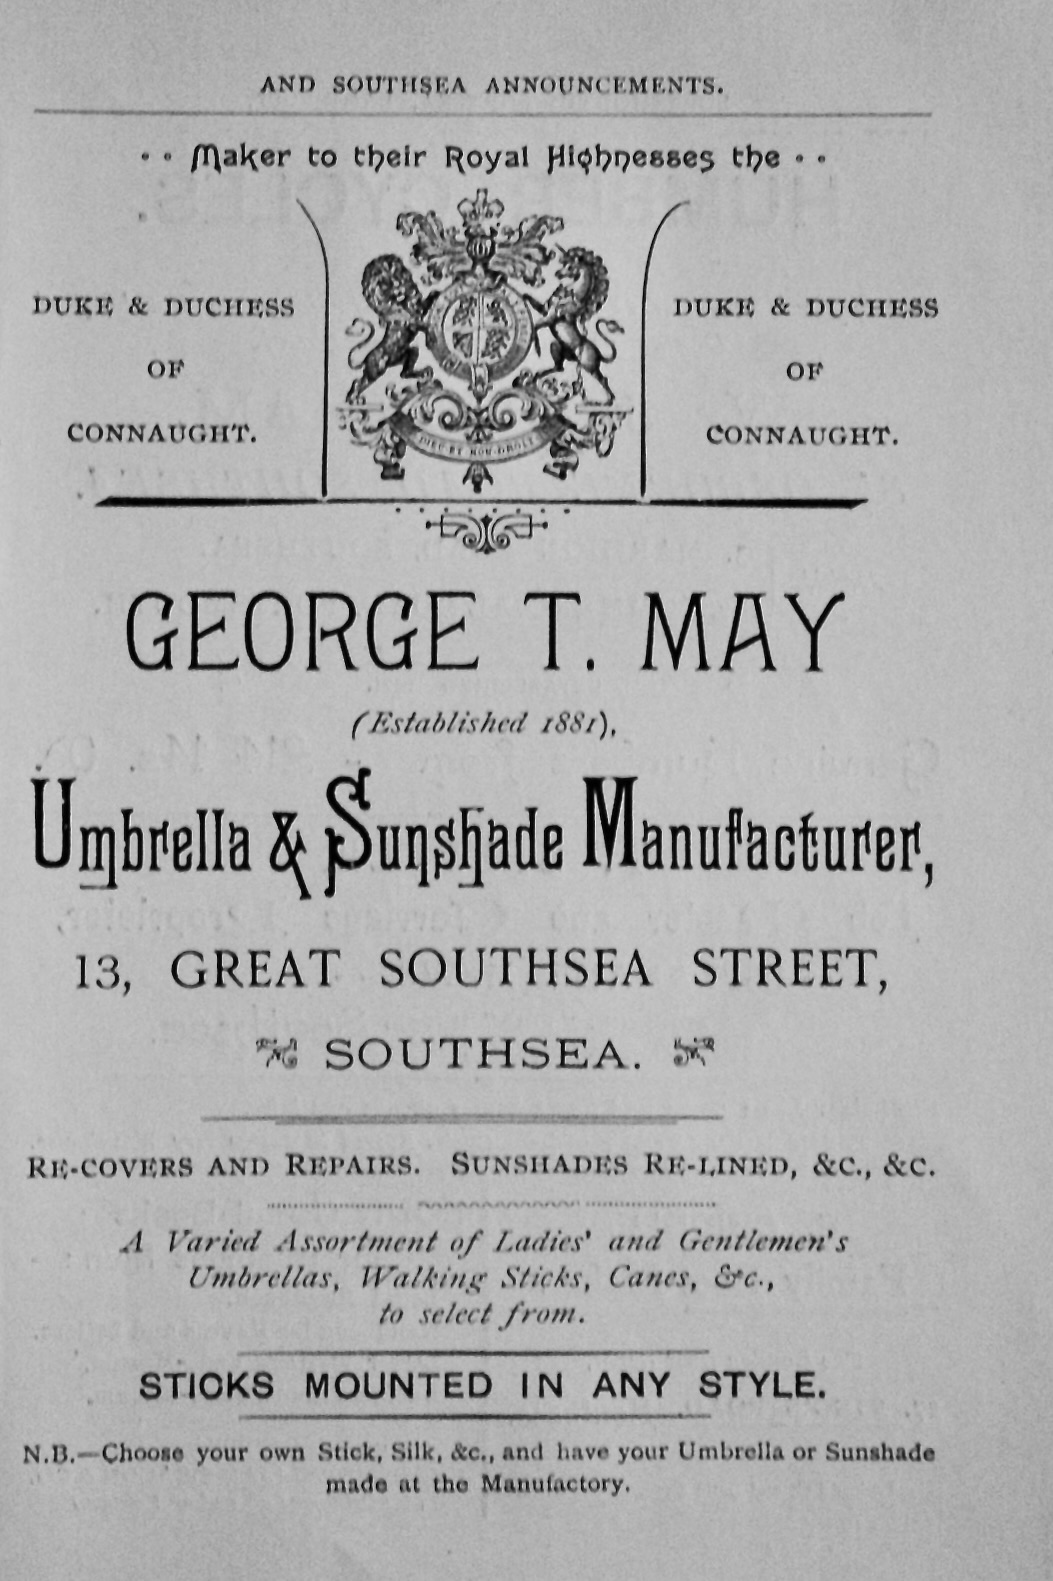 George T. May,  Umbrella & Sunshade Manufacturer, 13, Great Southsea Street